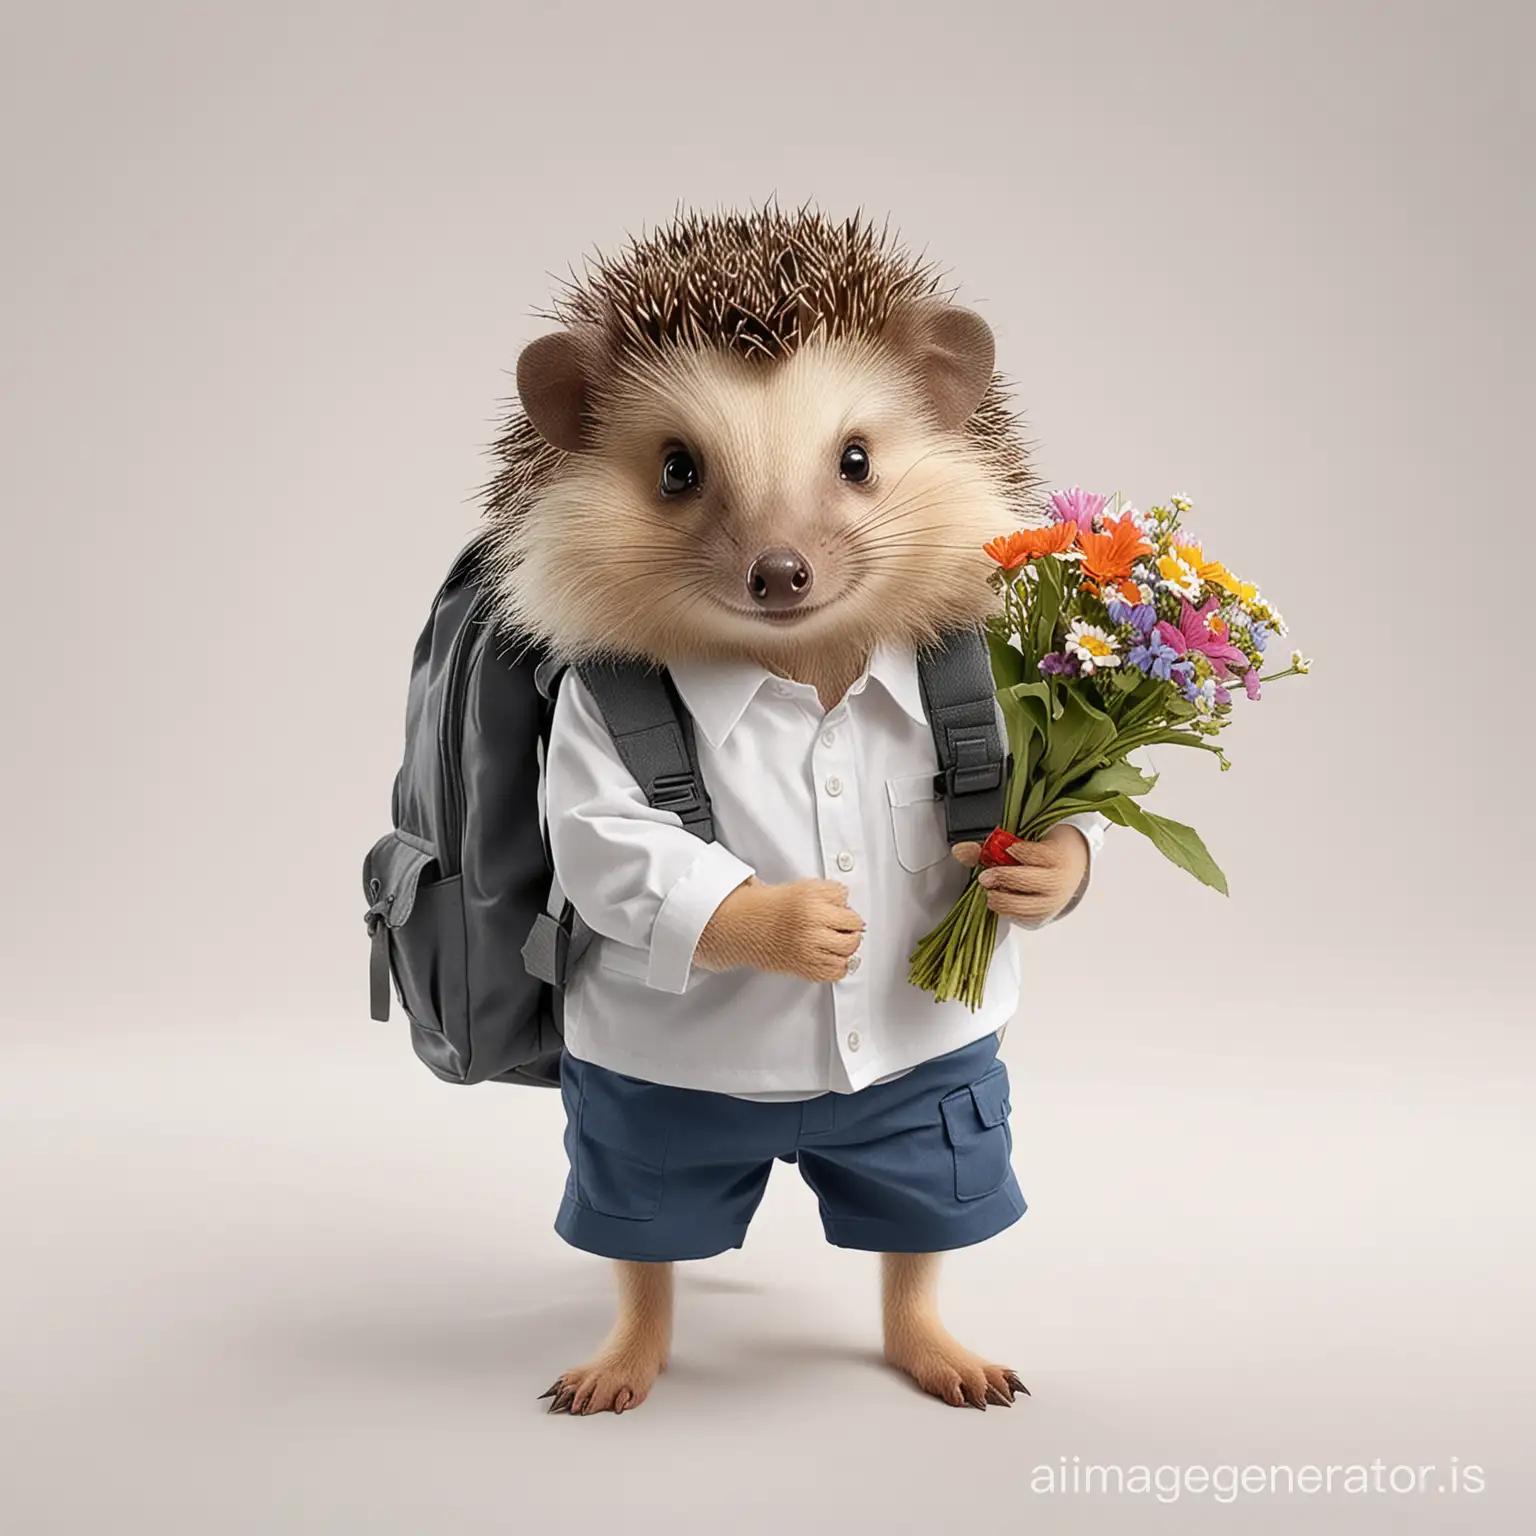 little cute hedgehog in school uniform, getting ready for school, with a backpack on its shoulders, holding a bouquet, outlined against flowers, white background